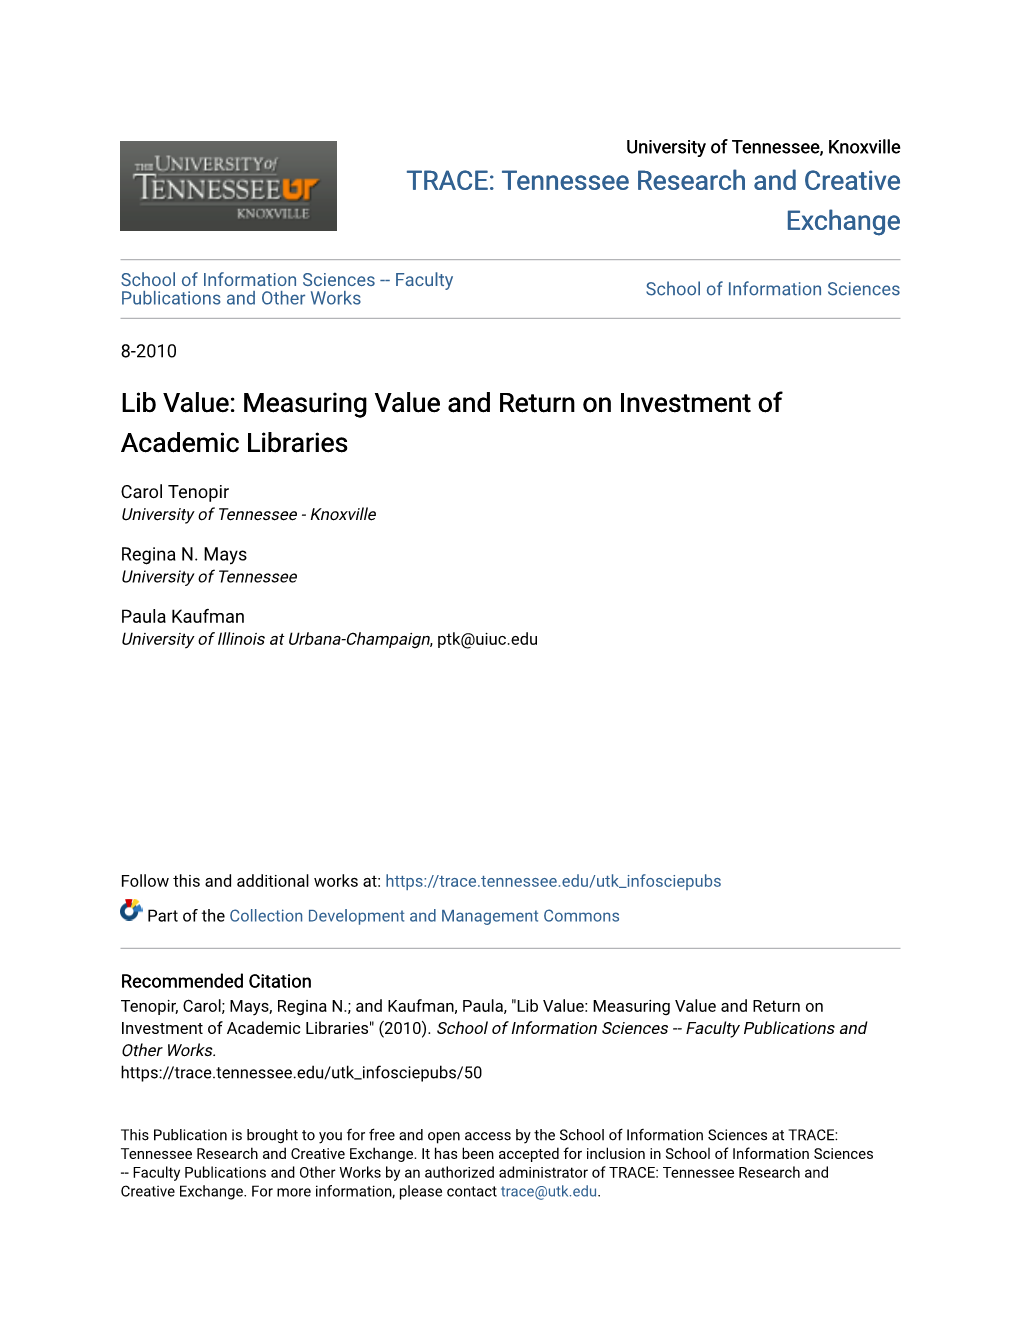 Lib Value: Measuring Value and Return on Investment of Academic Libraries